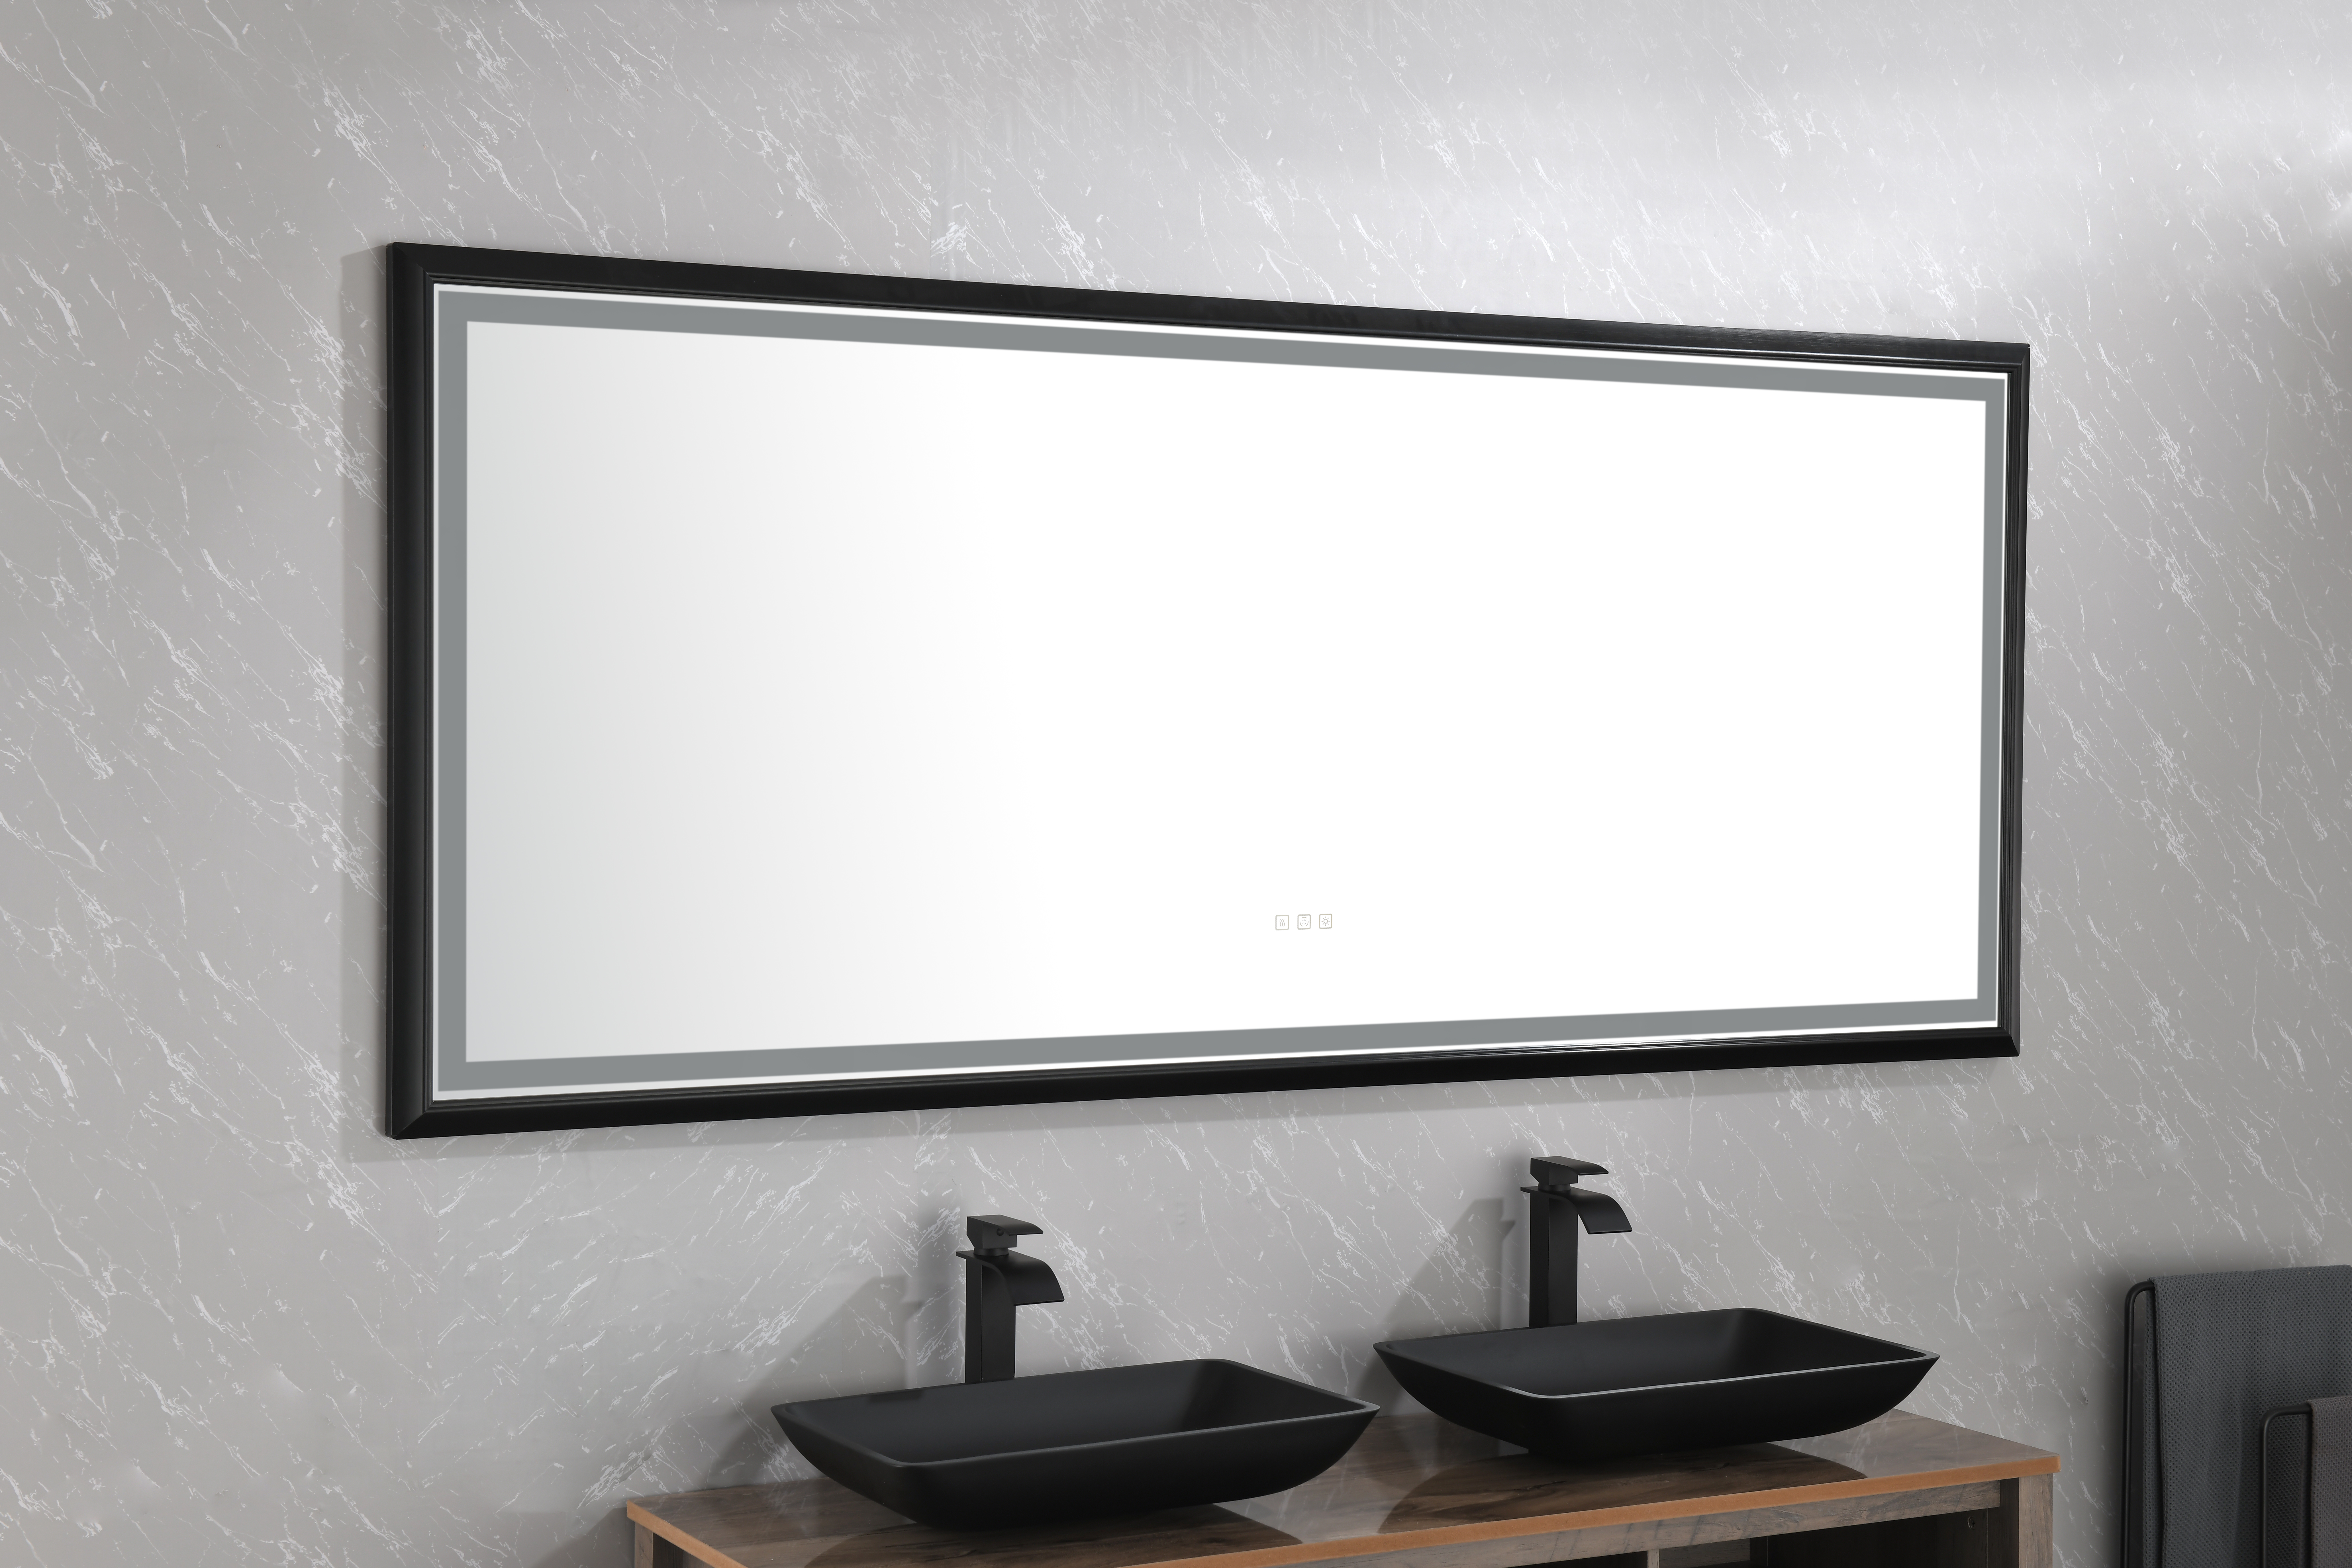 72in. W x 36in. H Oversized Rectangular Black Framed LED Mirror Anti-Fog Dimmable Wall Mount Bathroom Vanity Mirror \\\\n\\\\nHD Wall Mirror Kit For Gym And Dance Studio 36X 72Inches With Safety Ba-CASAINC